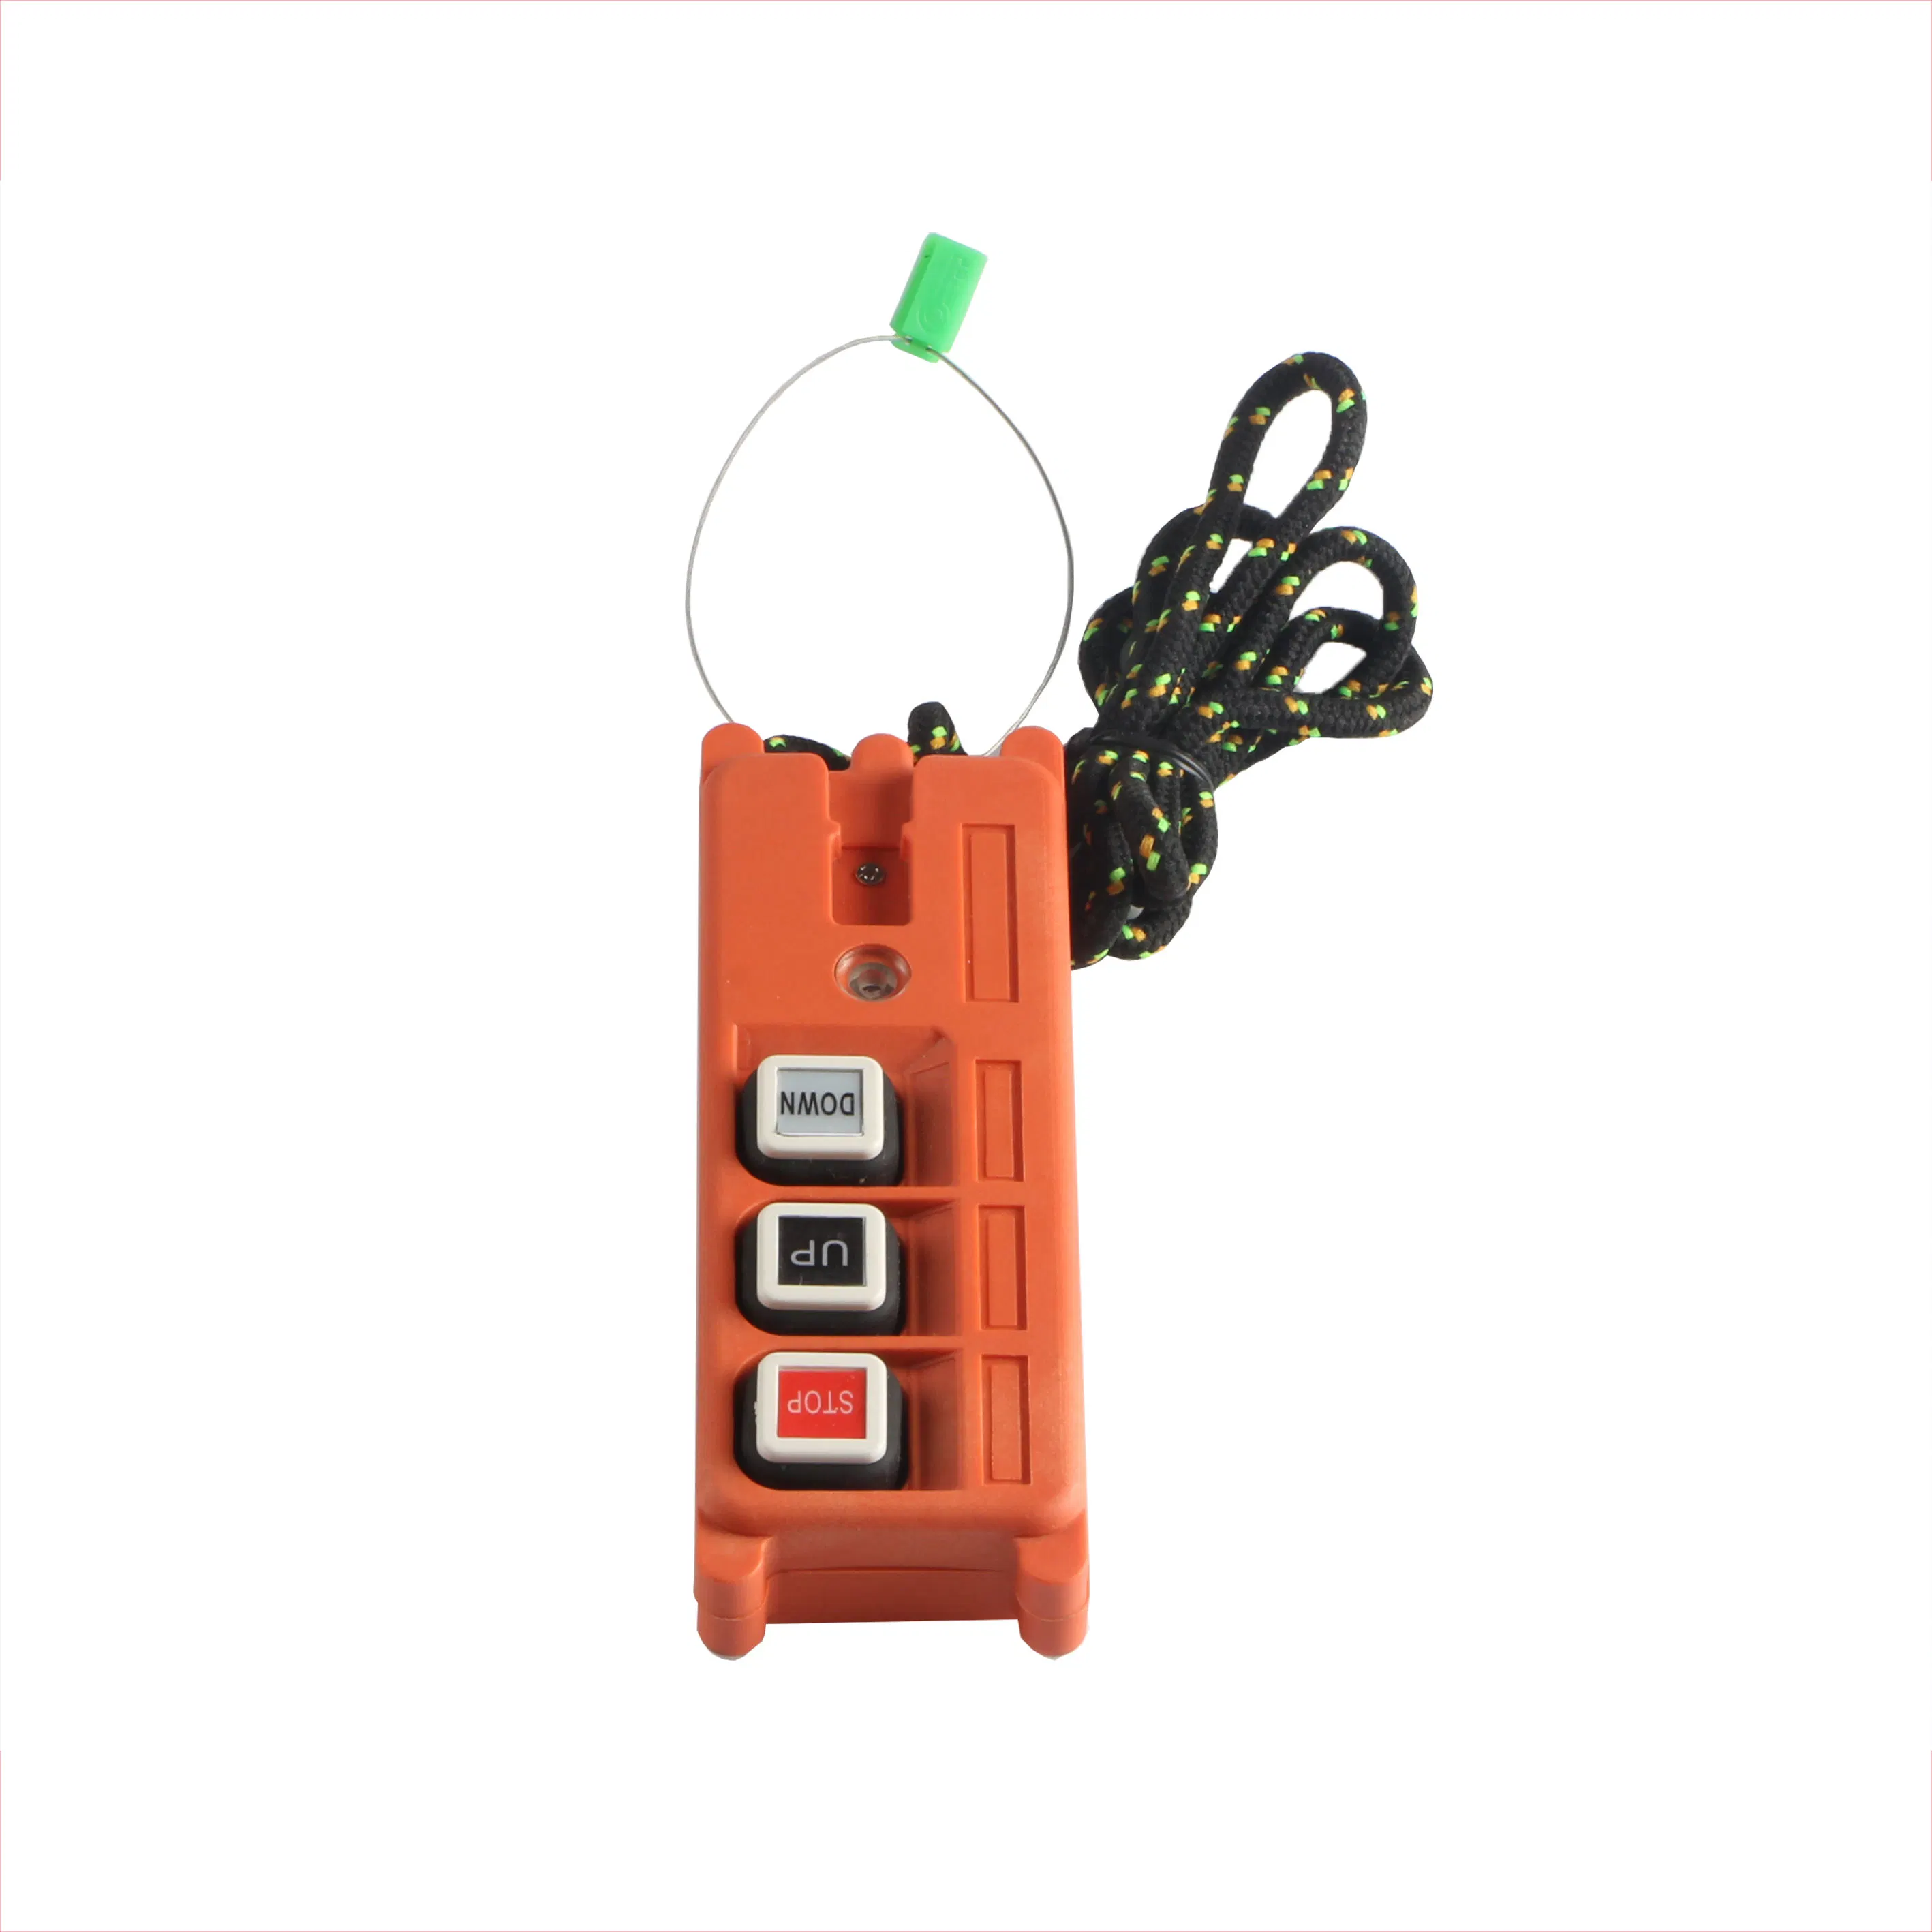 F21-2D Double Speed Radio Industrial Crane Electric Chain Hoist Wireless Remote Control